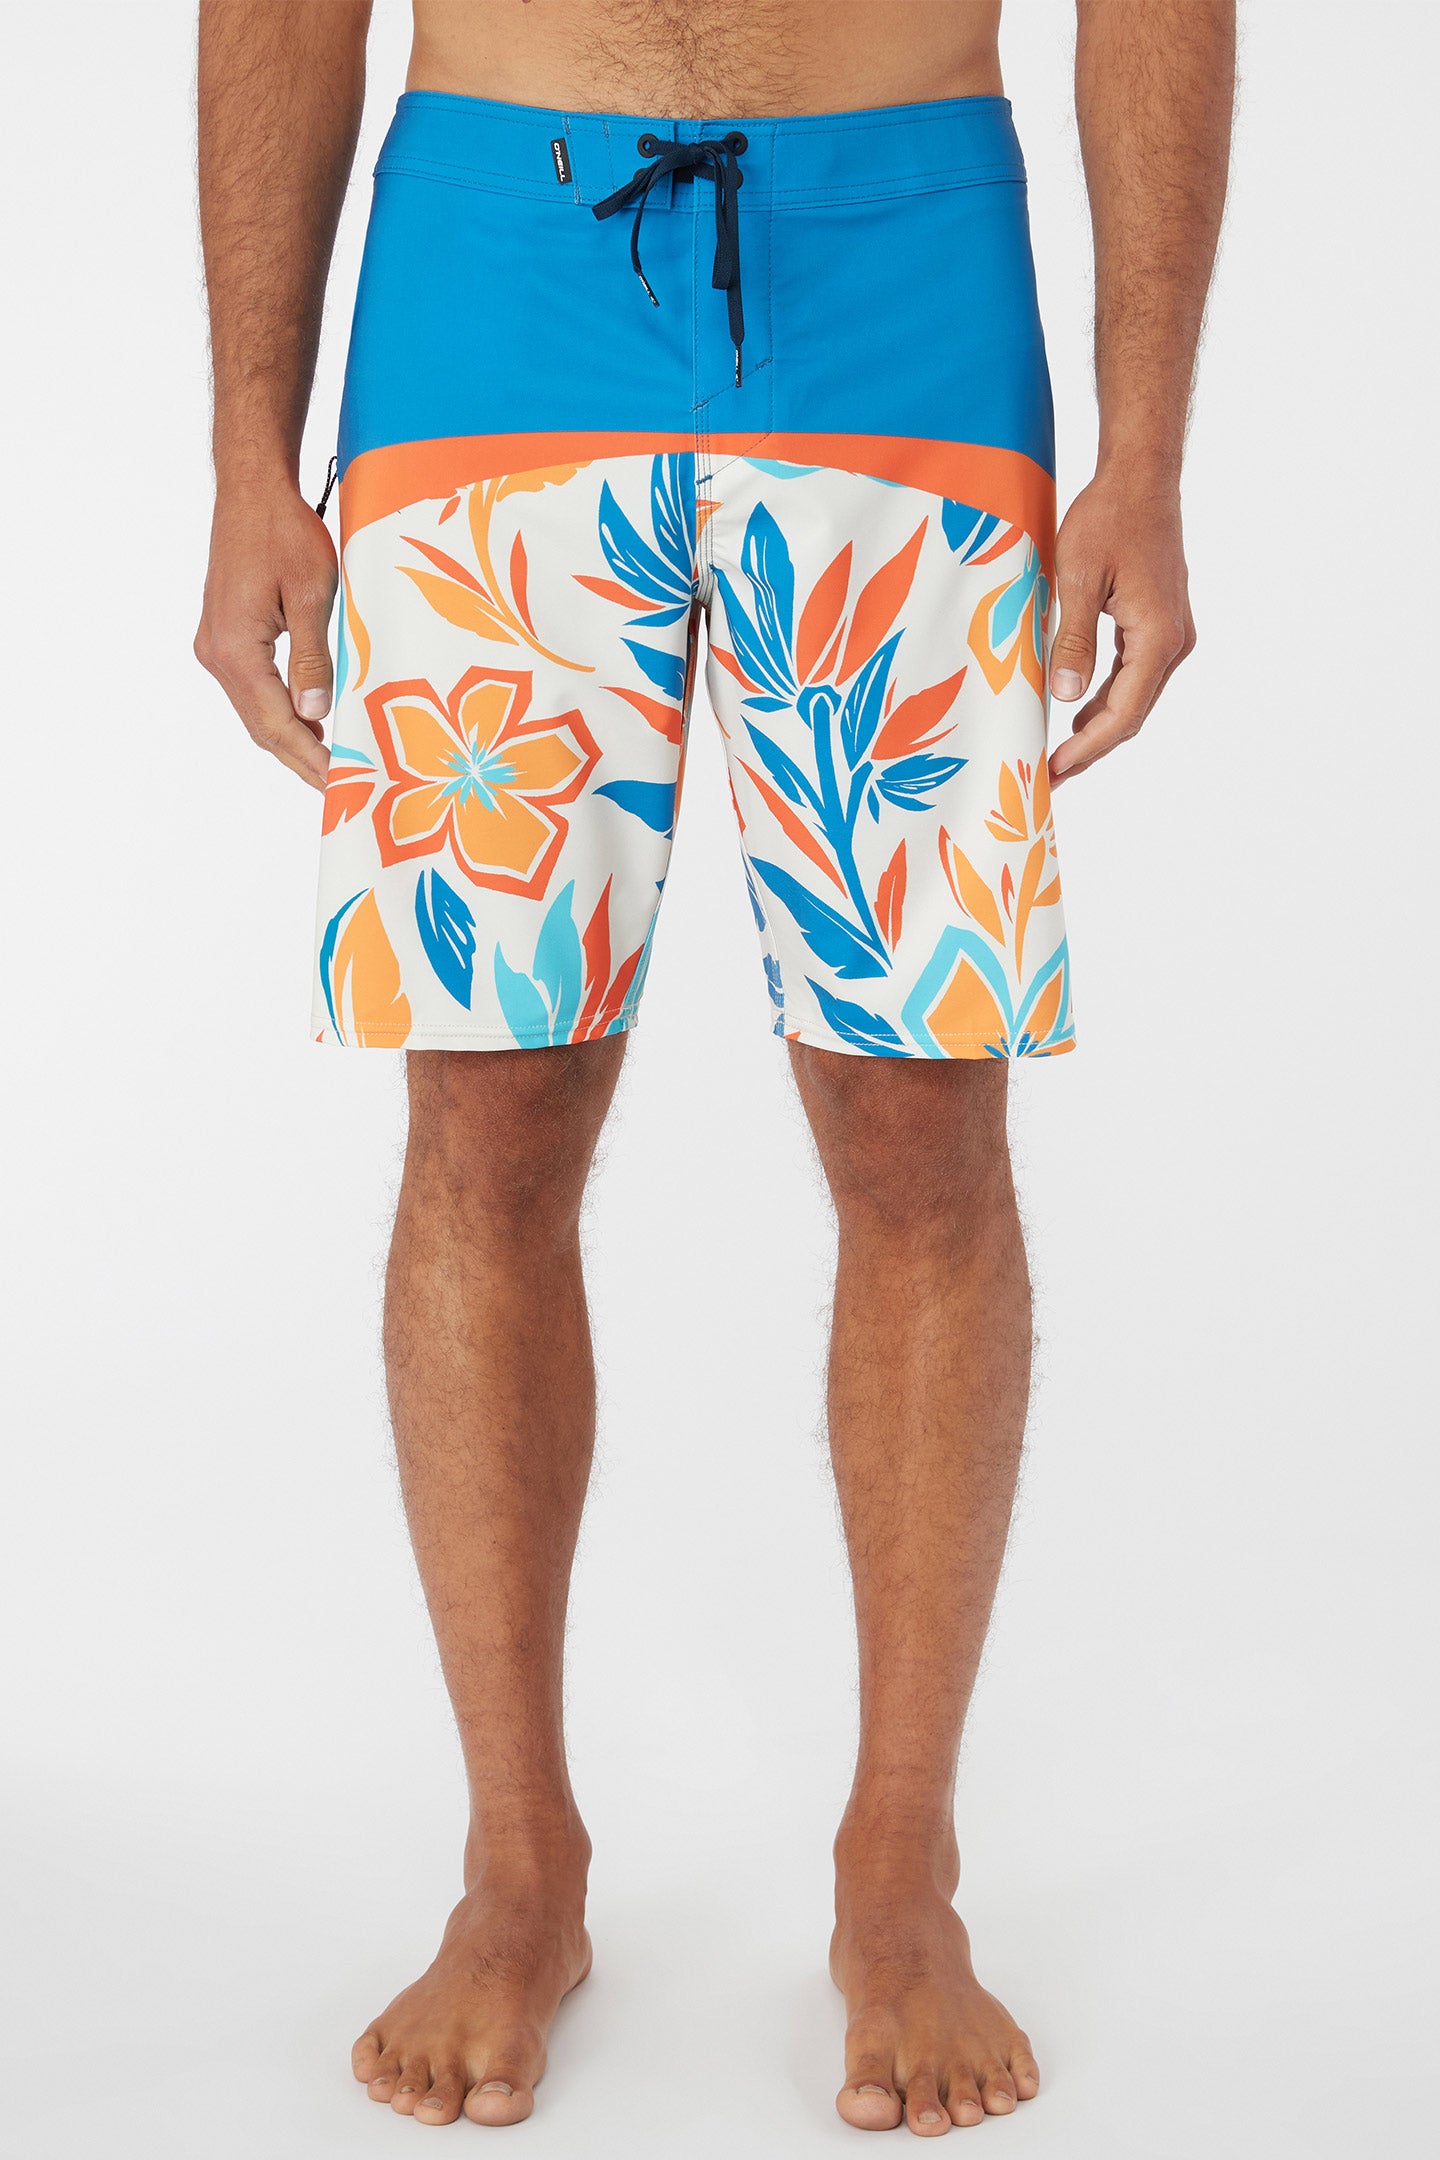 Learn heaps about boardshorts right here right now